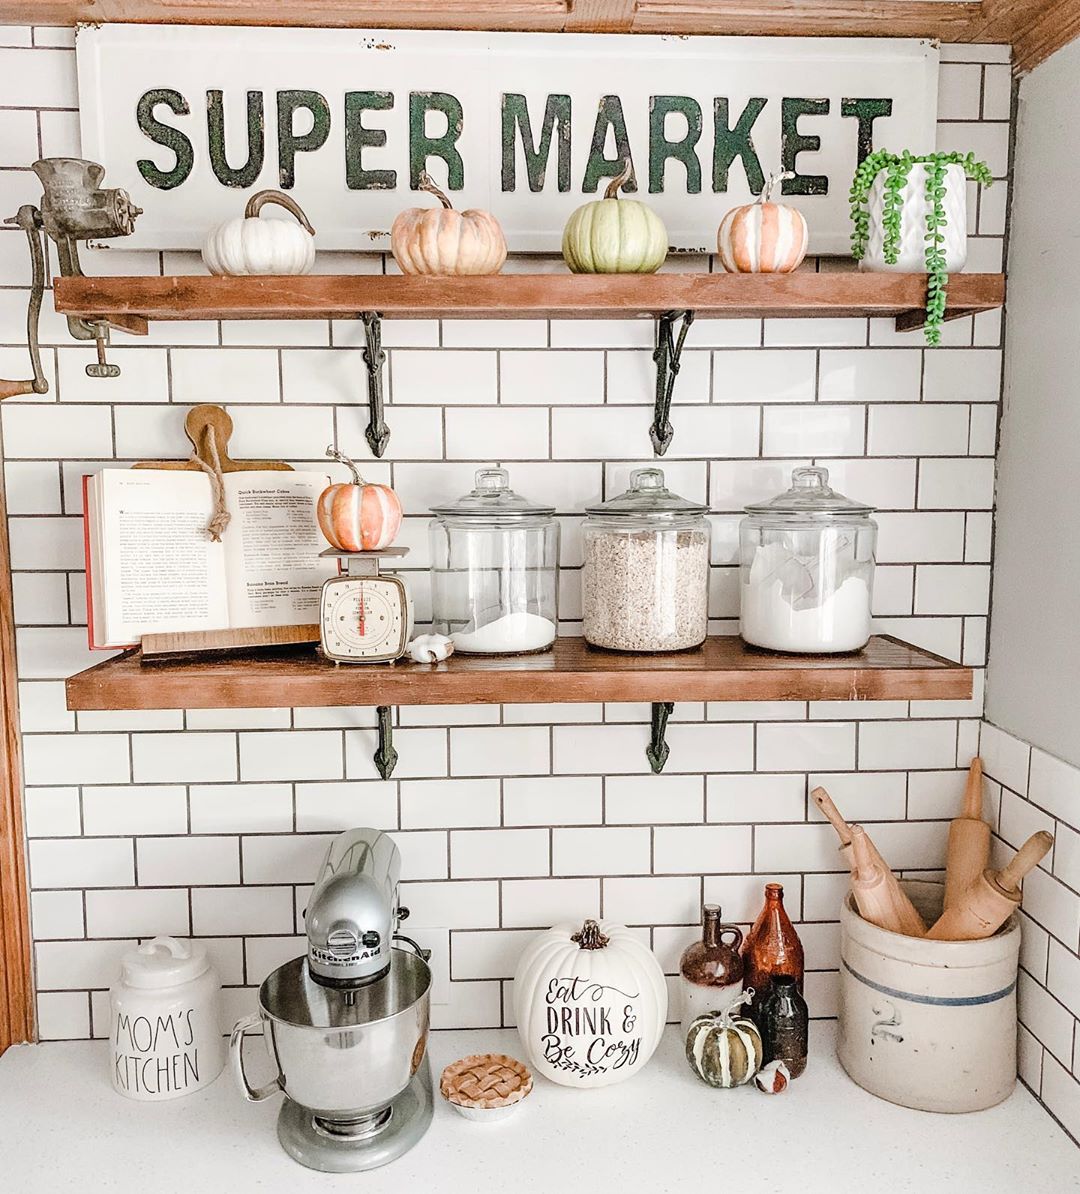 Kitchen shelves with antique items. Photo by Instagram user @redbrickfauxfarmhouse